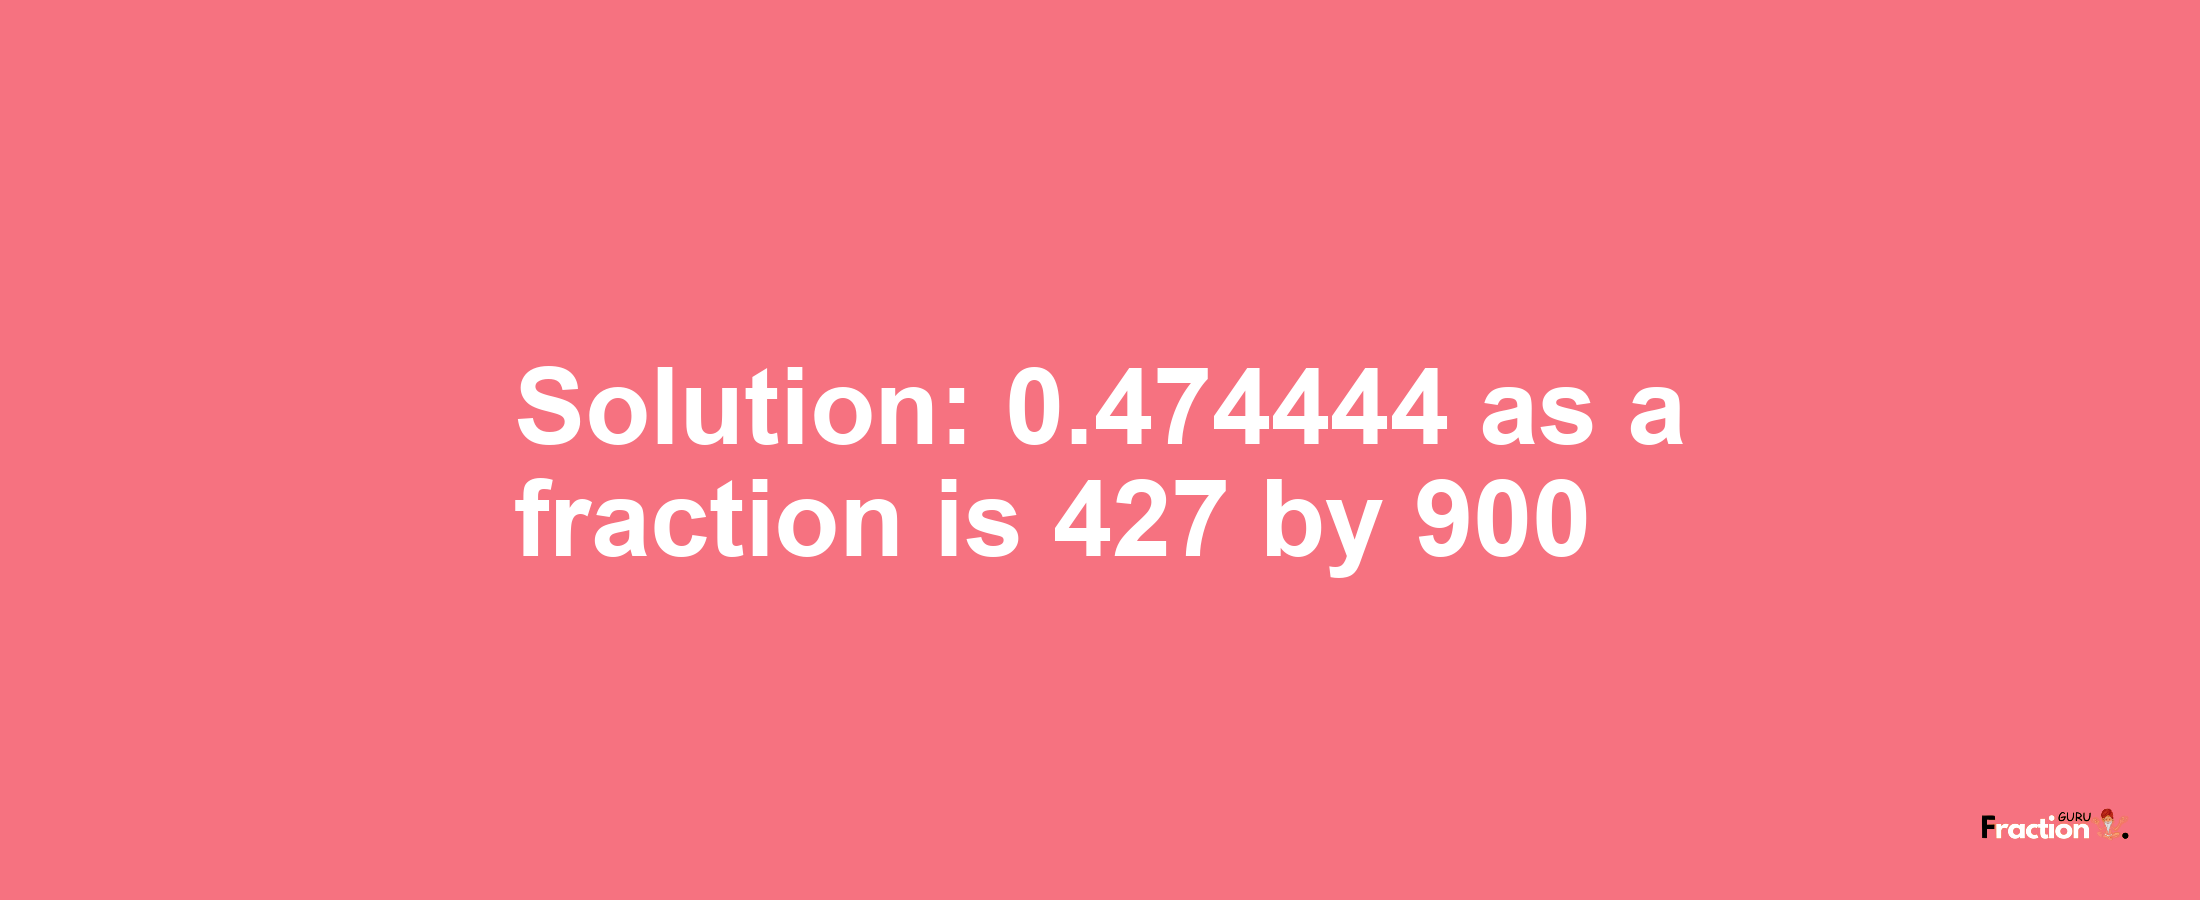 Solution:0.474444 as a fraction is 427/900